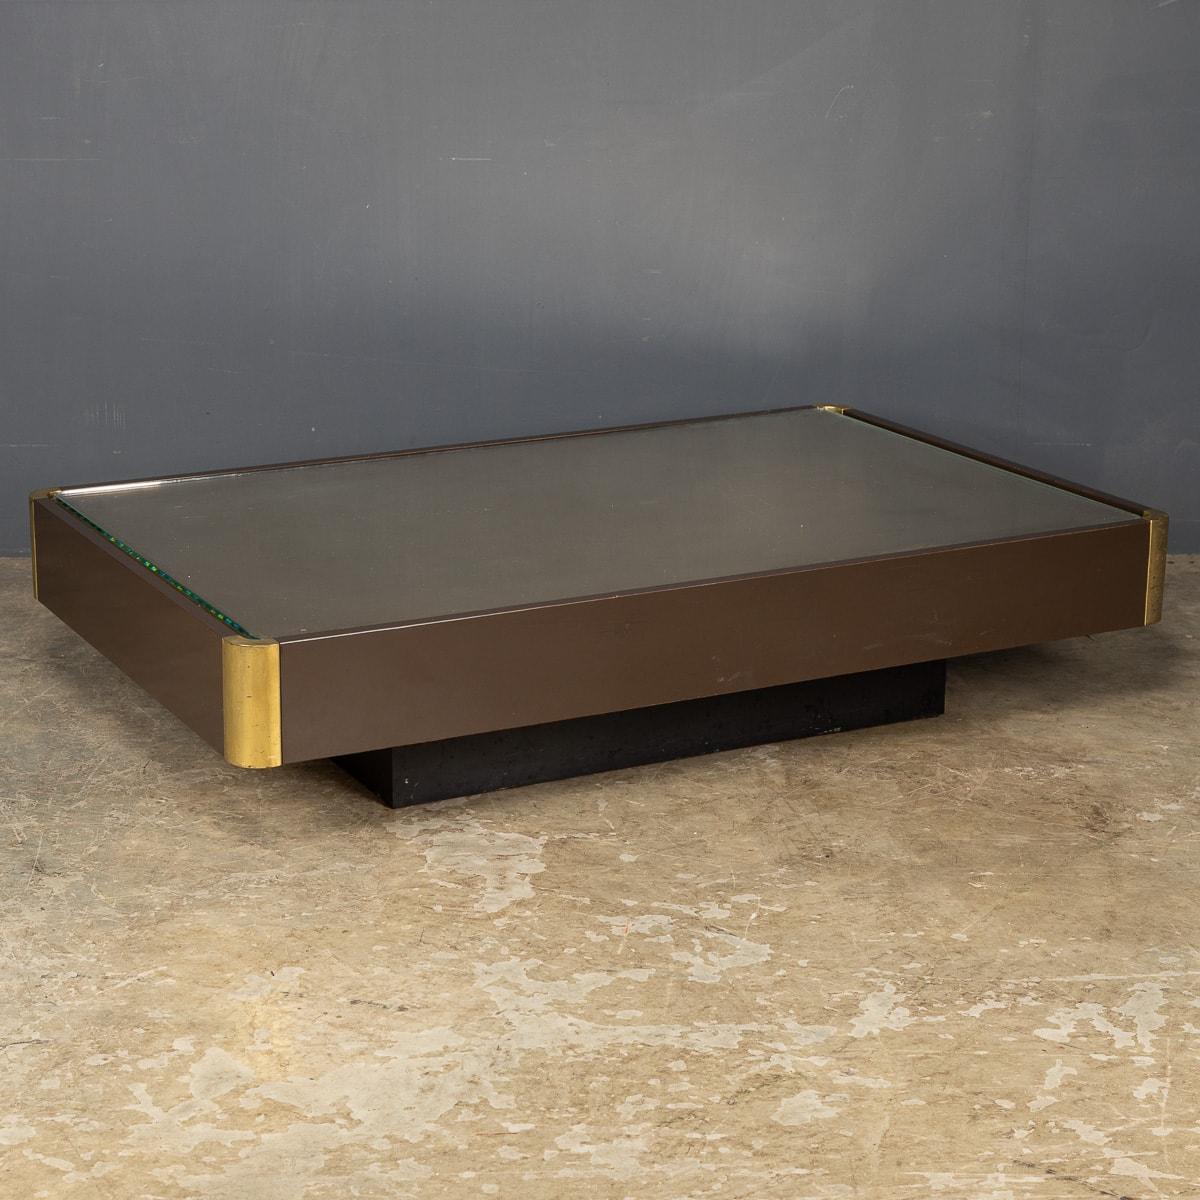 A low coffee table by Wlliy Rizzo in a lacquered finish with a glass top over a brass panel and brass corner detail. A stylish and wonderful addition to any contemporary interior looking to add a quirky finish with a simple yet useful retro item of